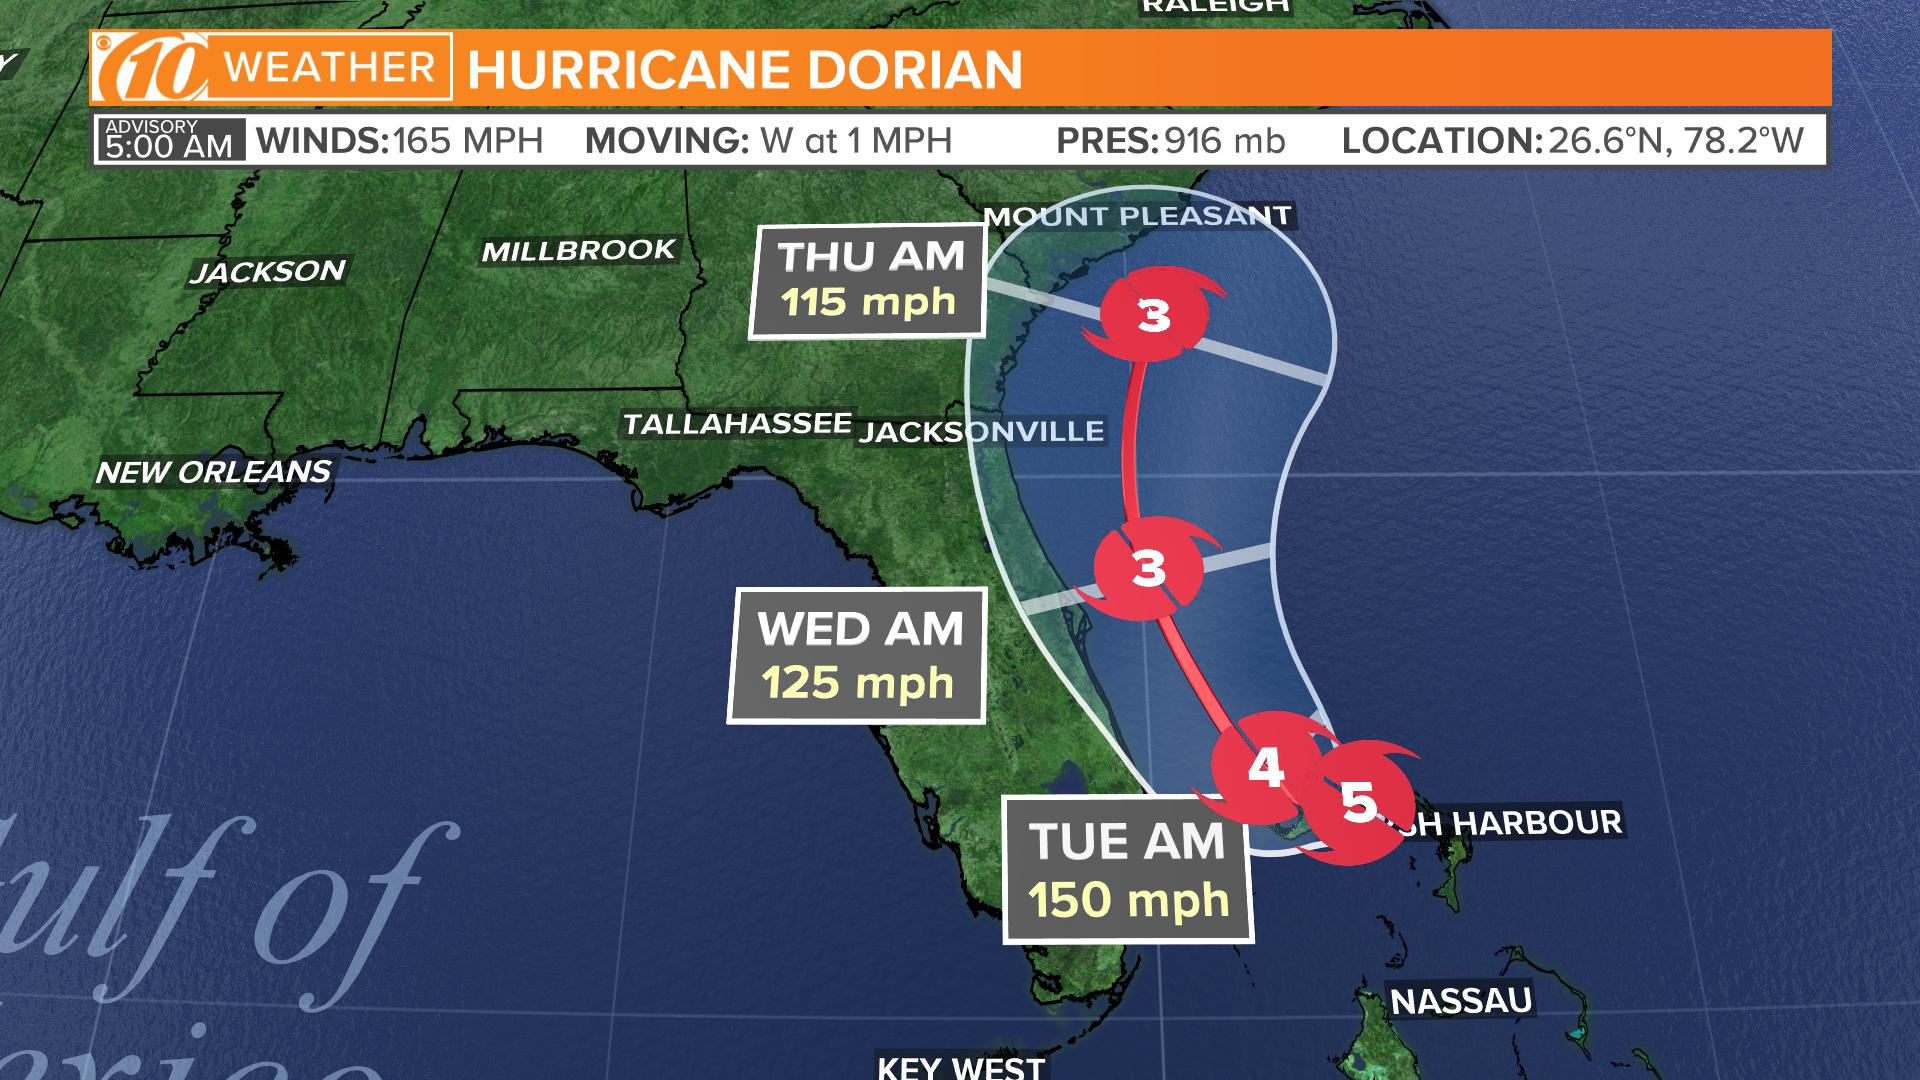 Hurricane Dorian is moving very slowly at 1 mph with winds up to 165 mph.